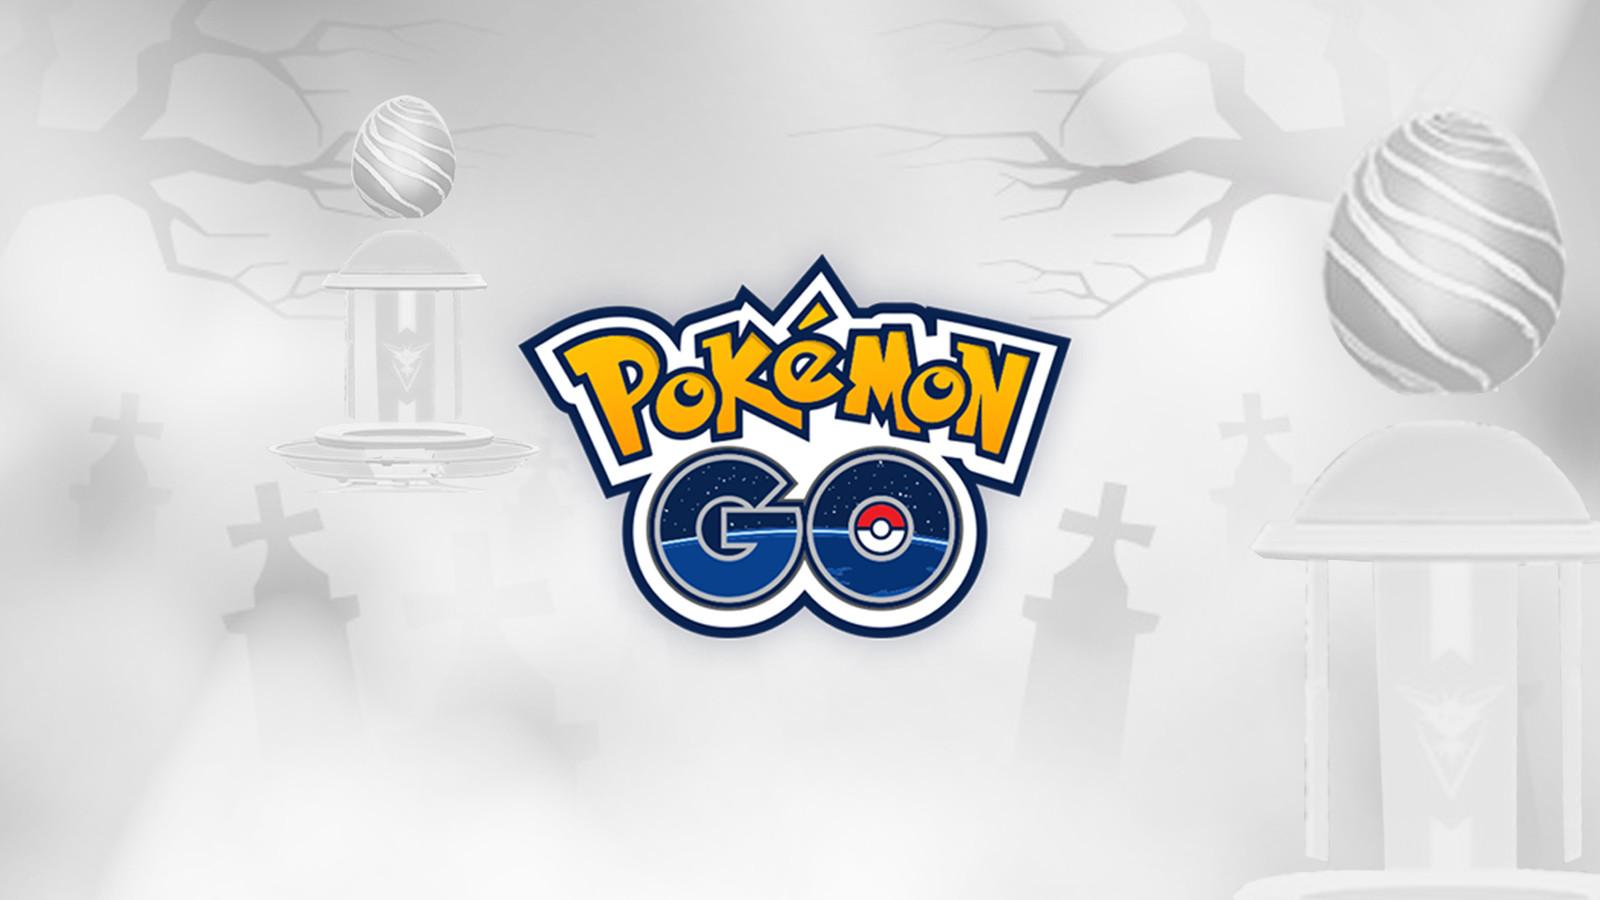 Pokemon Go': Top October events include new boss and shiny legendary